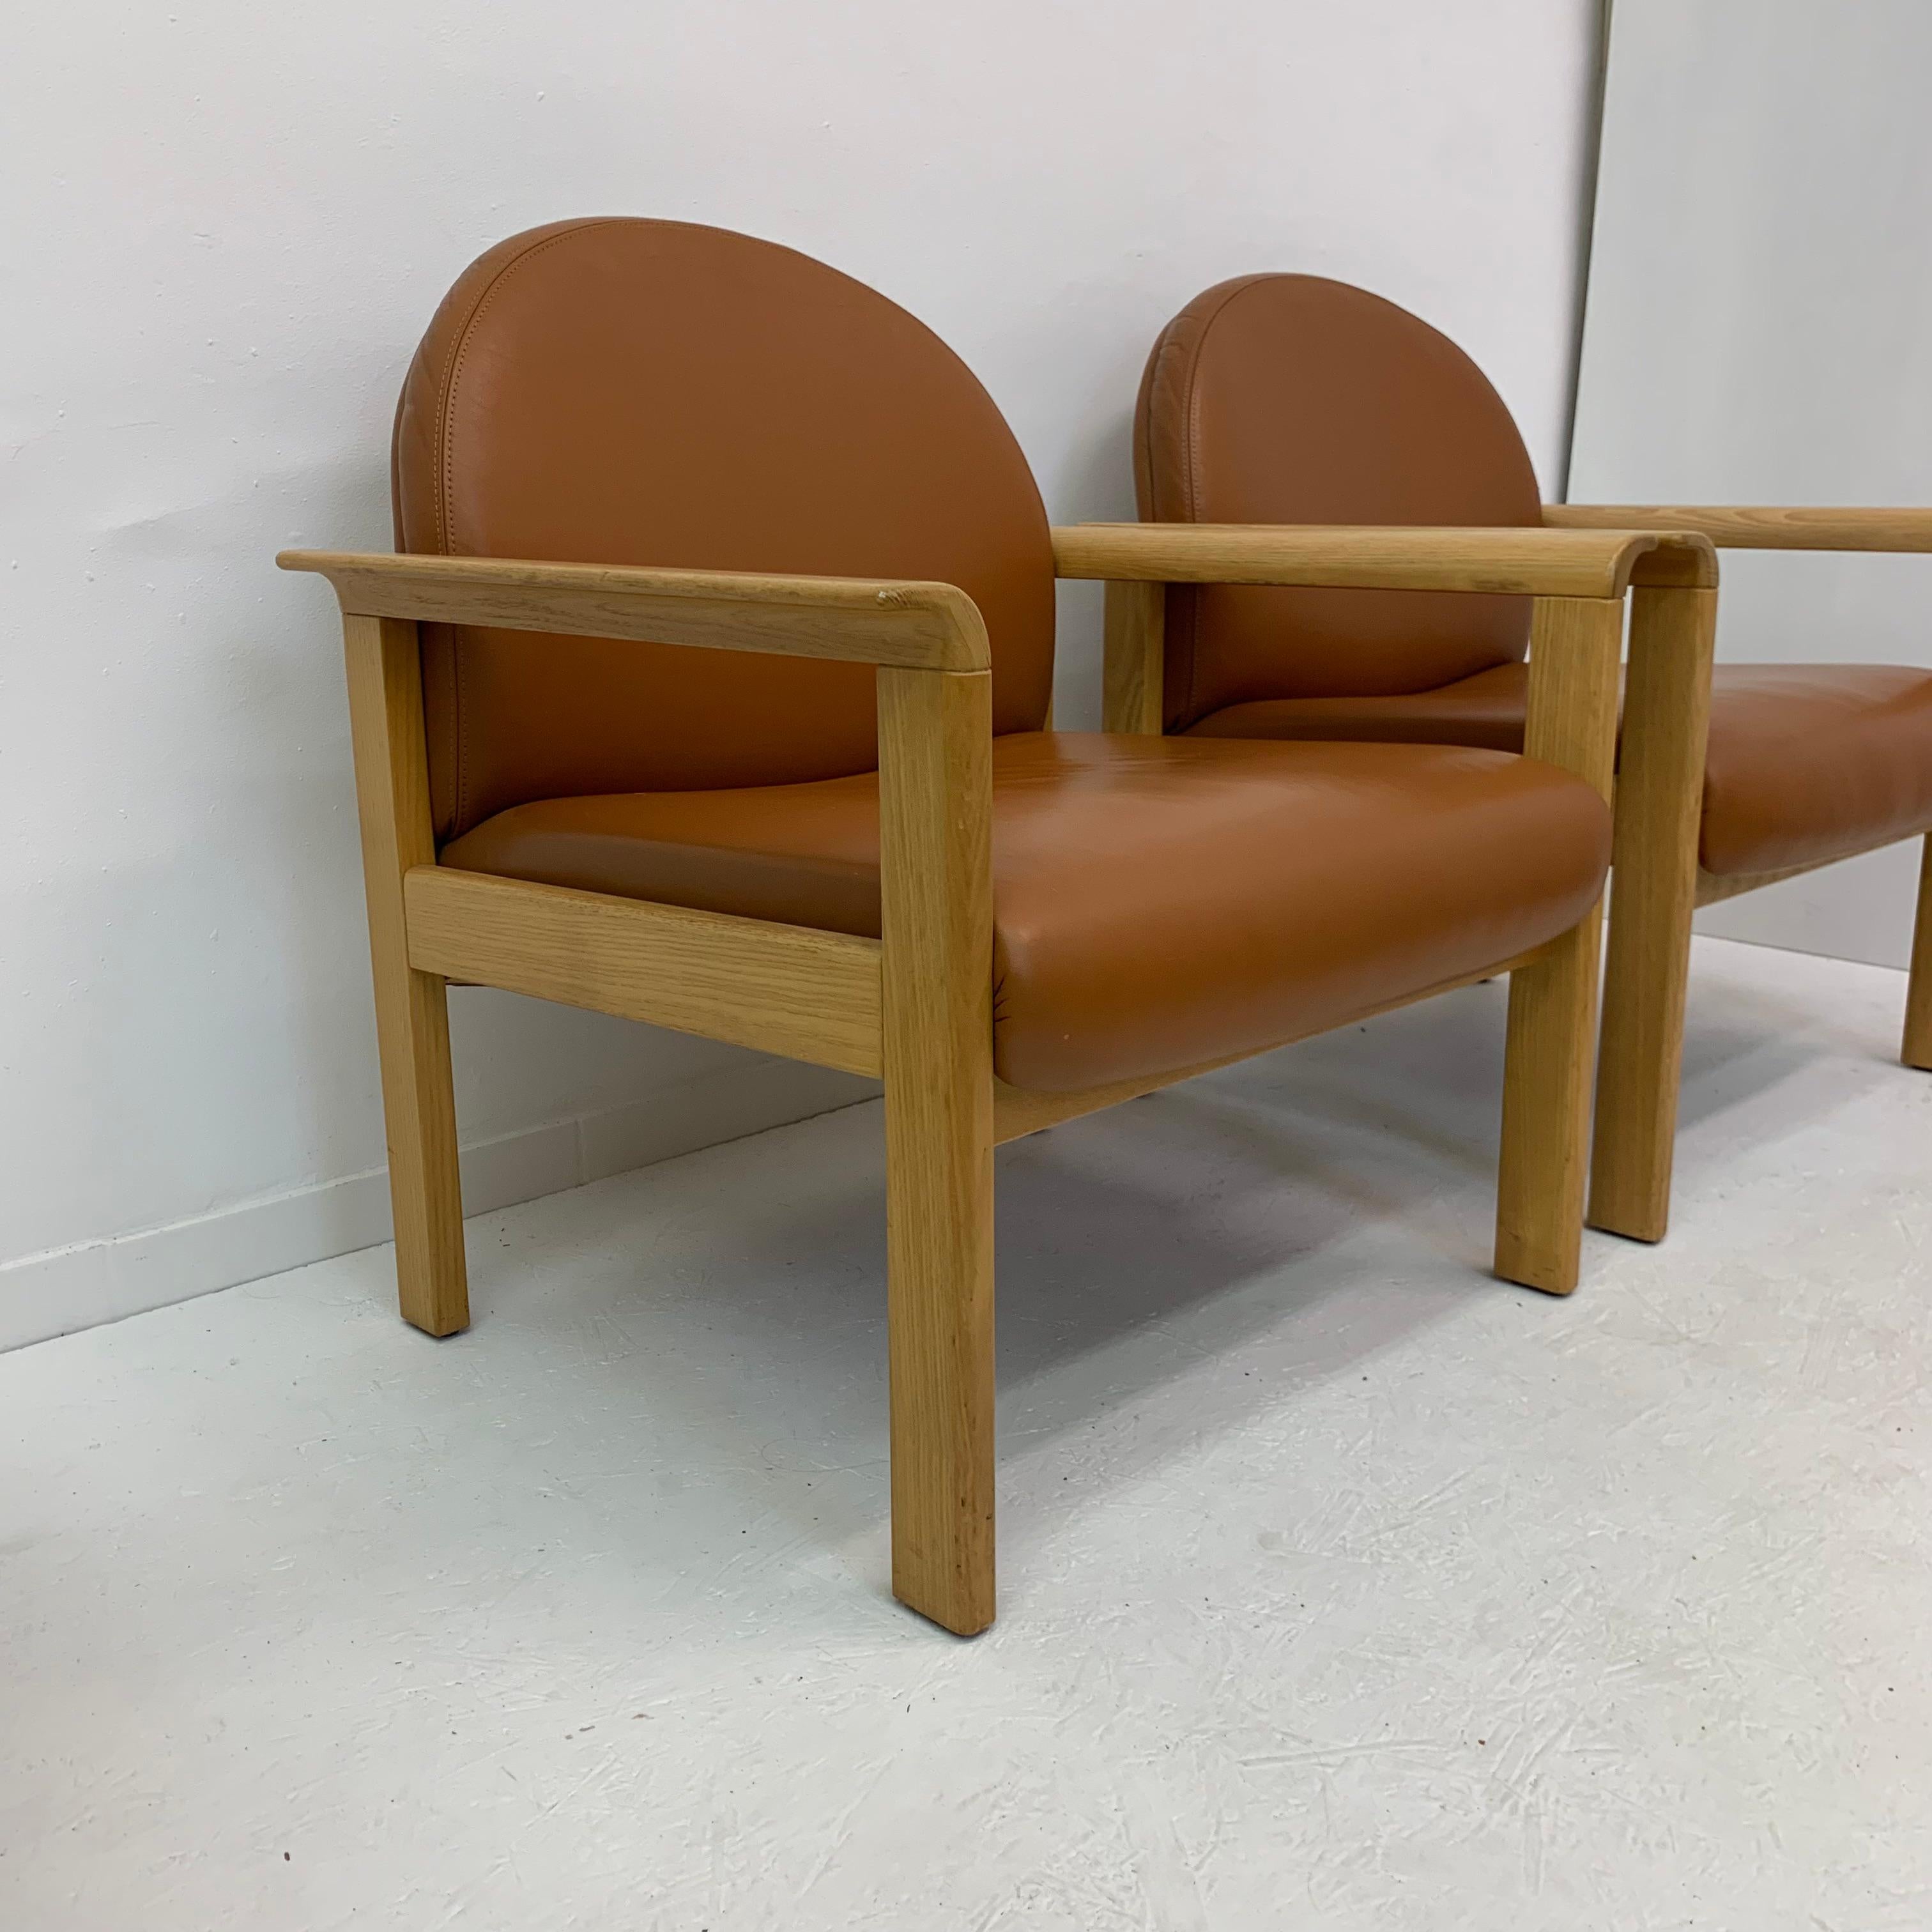 Set of 2 leather lounge chair, 1970’s.